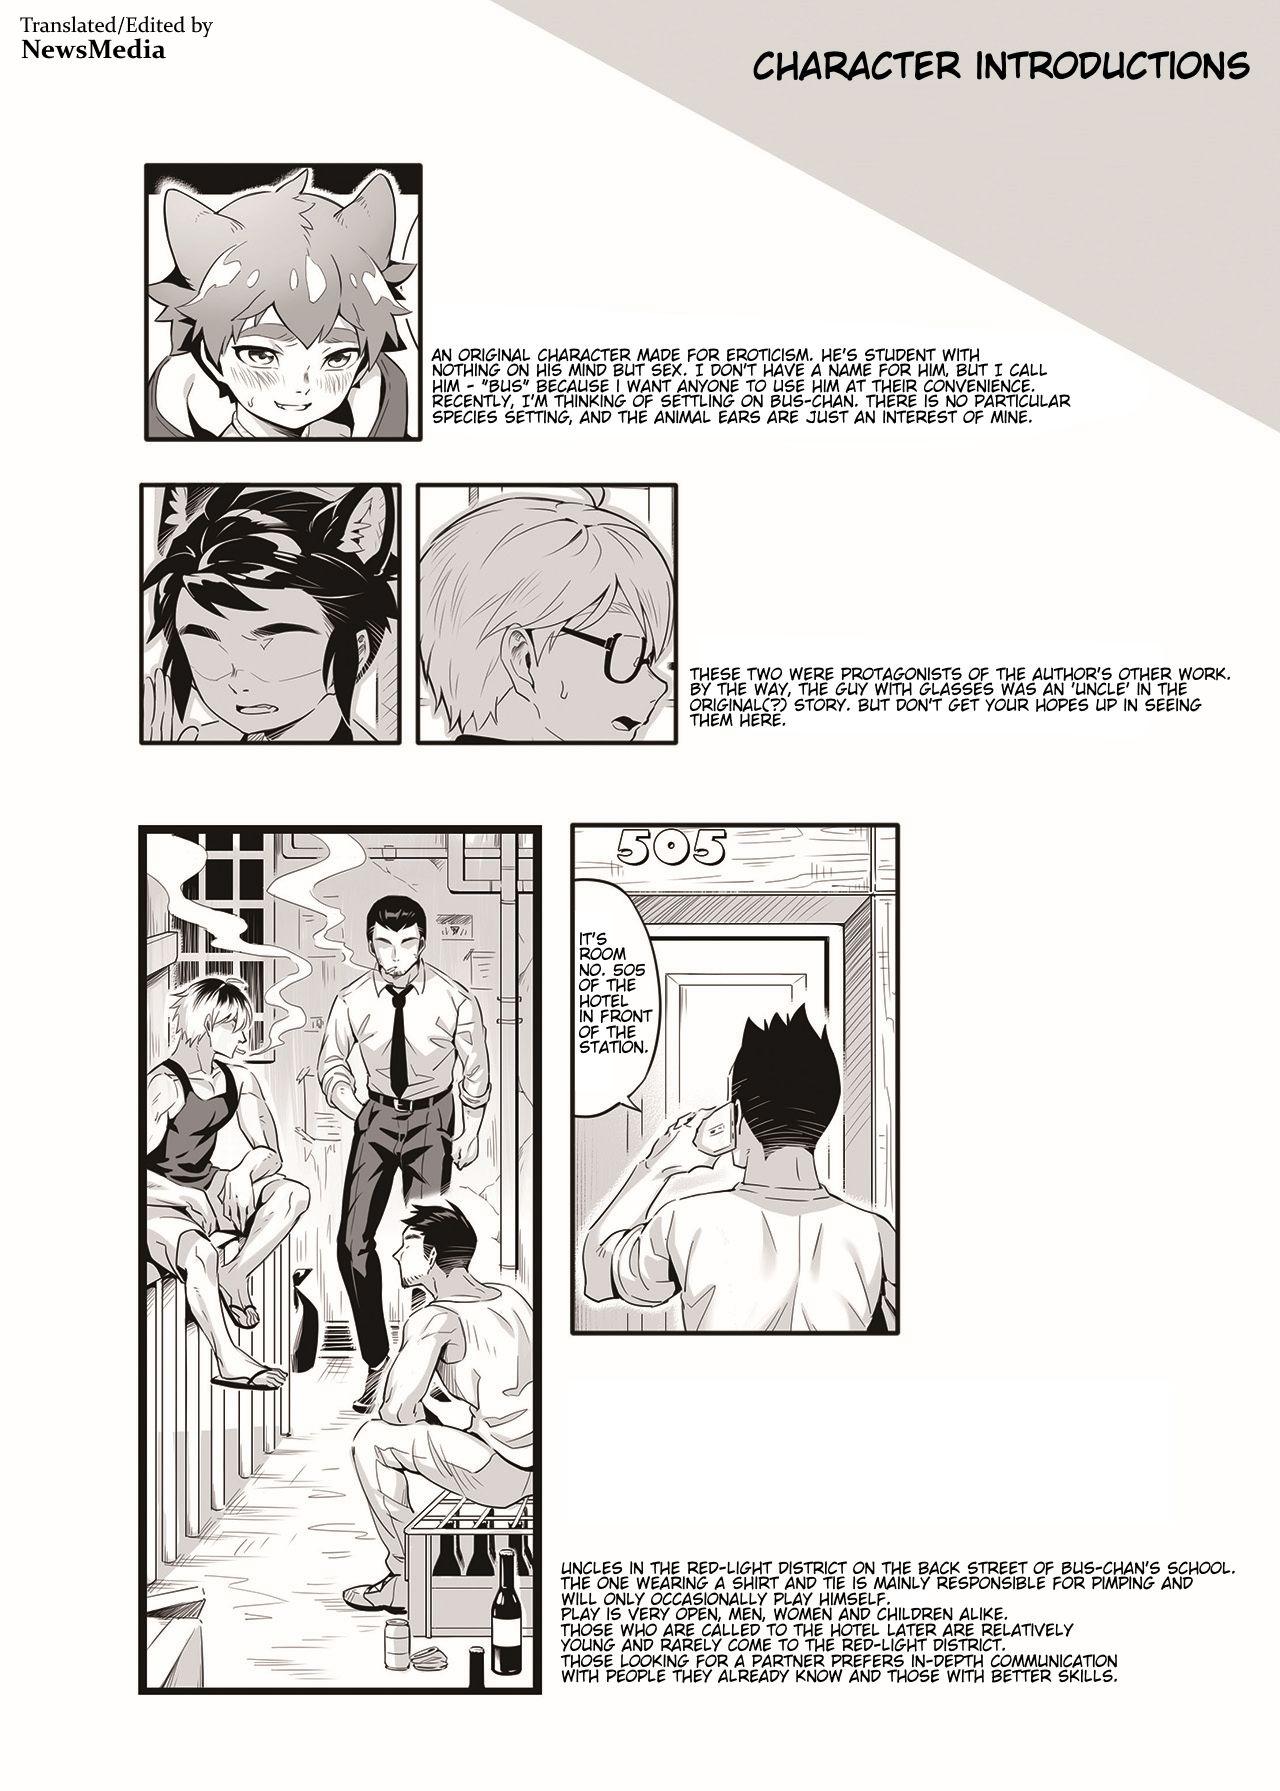 Hung Back Alley - Original Spying - Page 4